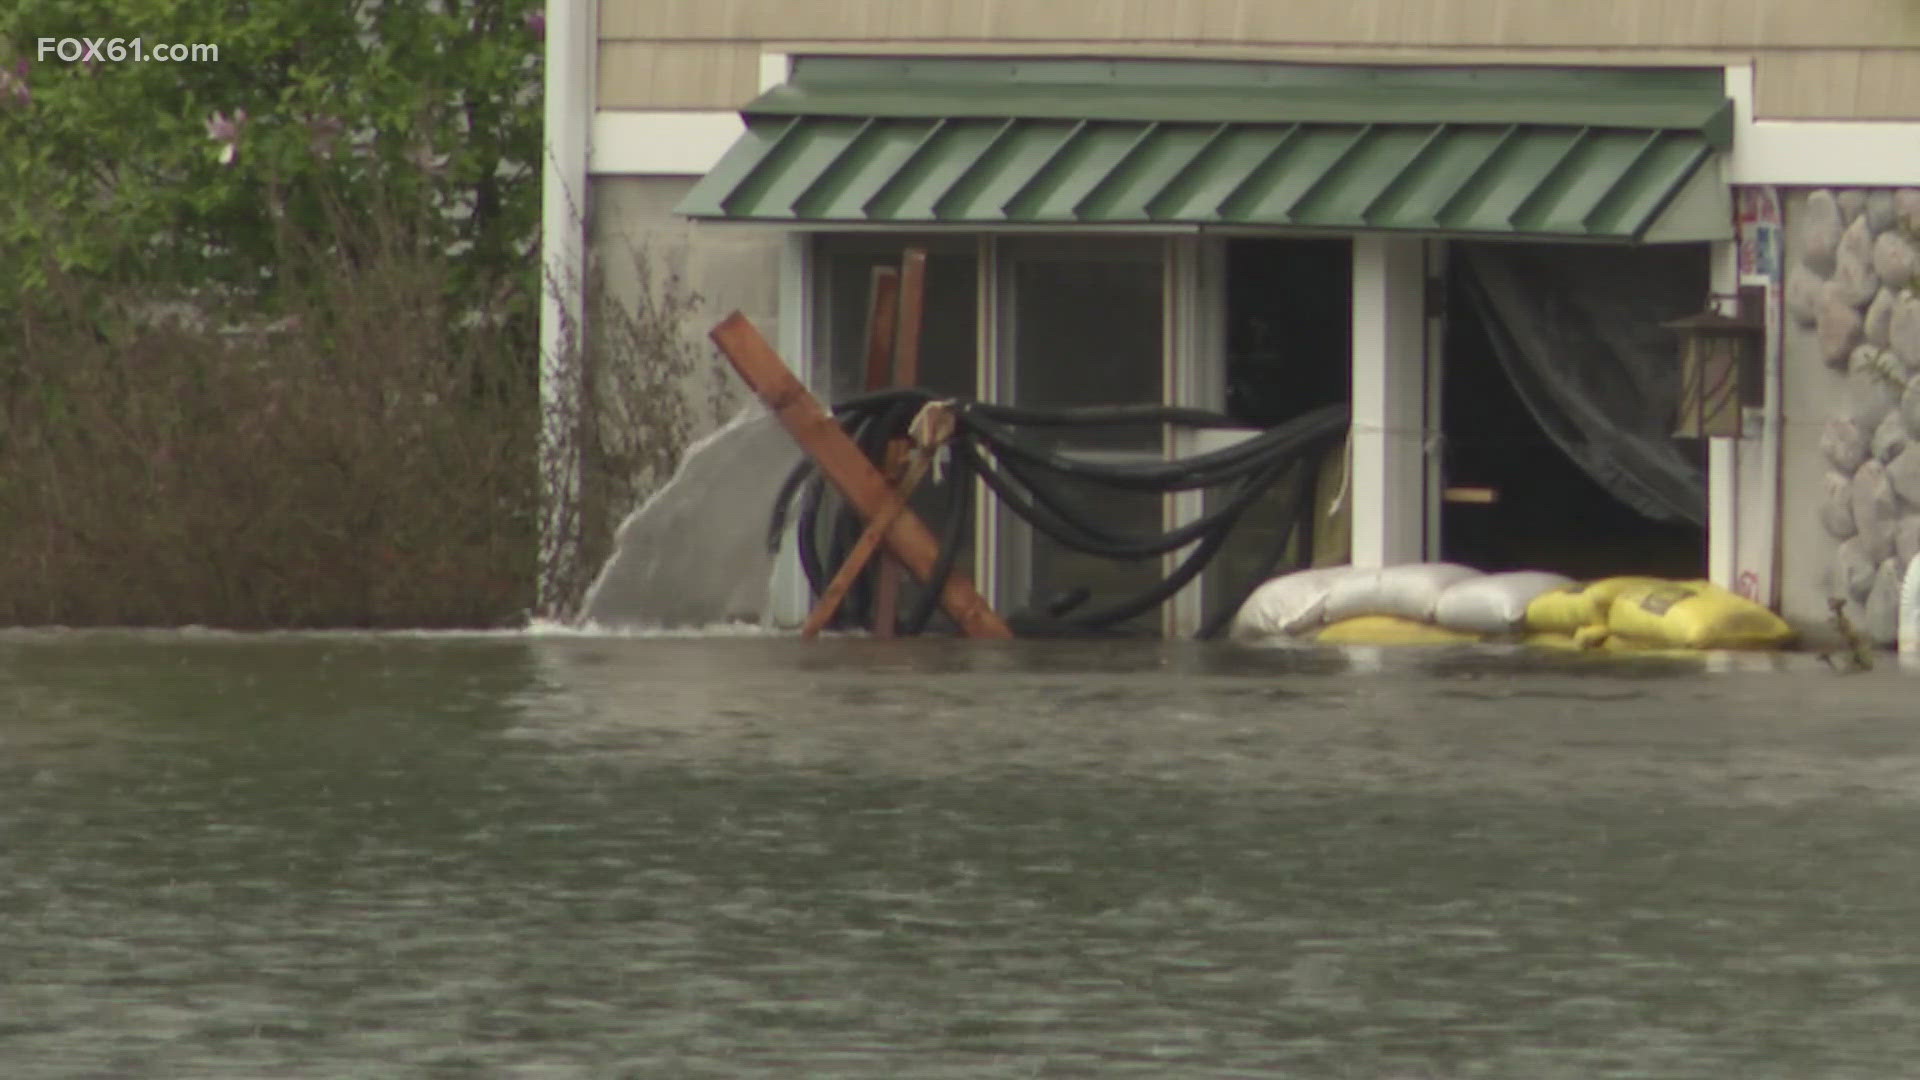 Wednesday’s rain isn’t enough to cause widespread flooding, but for residents of Jobs Pond in Portland, every drop makes it harder to keep their heads above water.